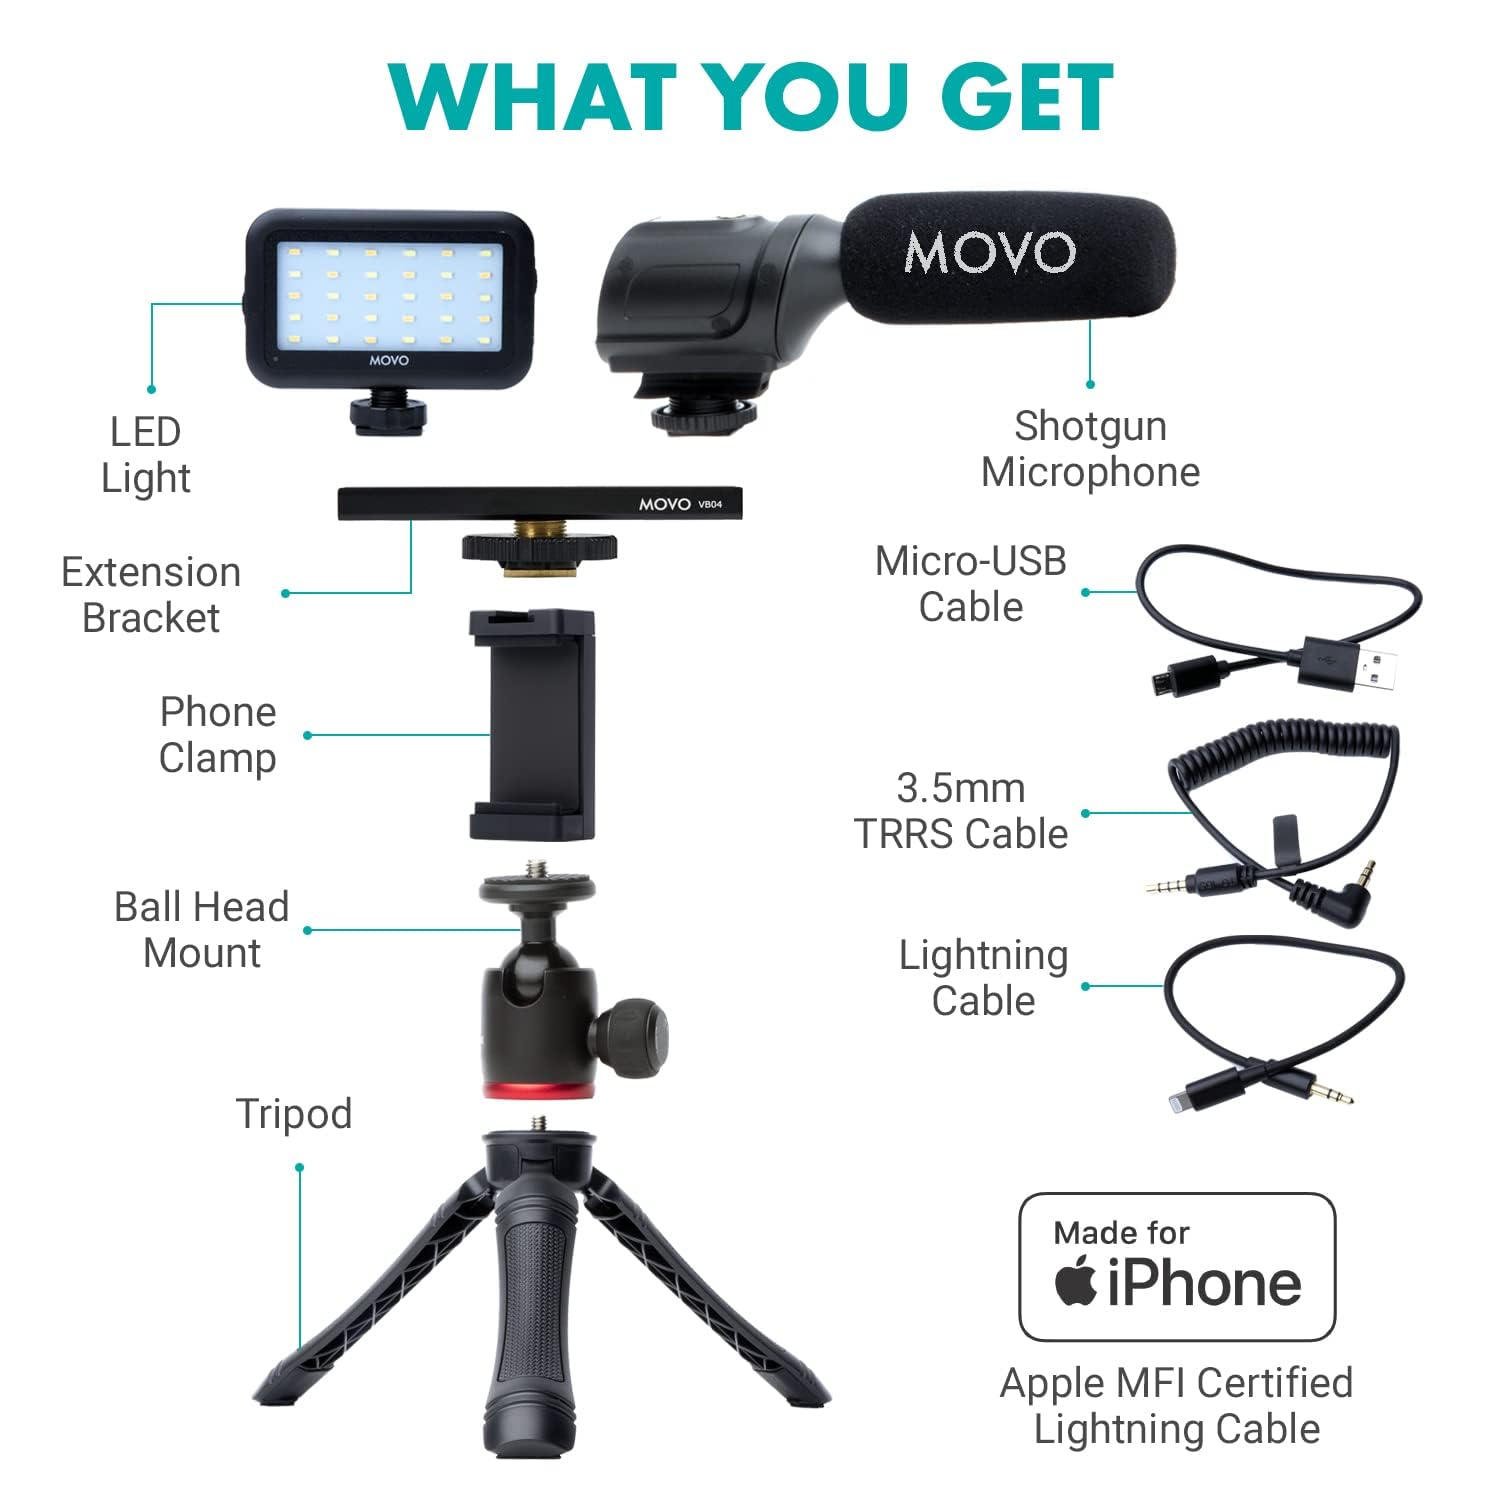 Movo iVlogger Vlogging Kit for iPhone - Lightning Compatible YouTube Starter Kit for Content Creators - Accessories: Phone Tripod, Phone Mount, LED Light and Shotgun Microphone